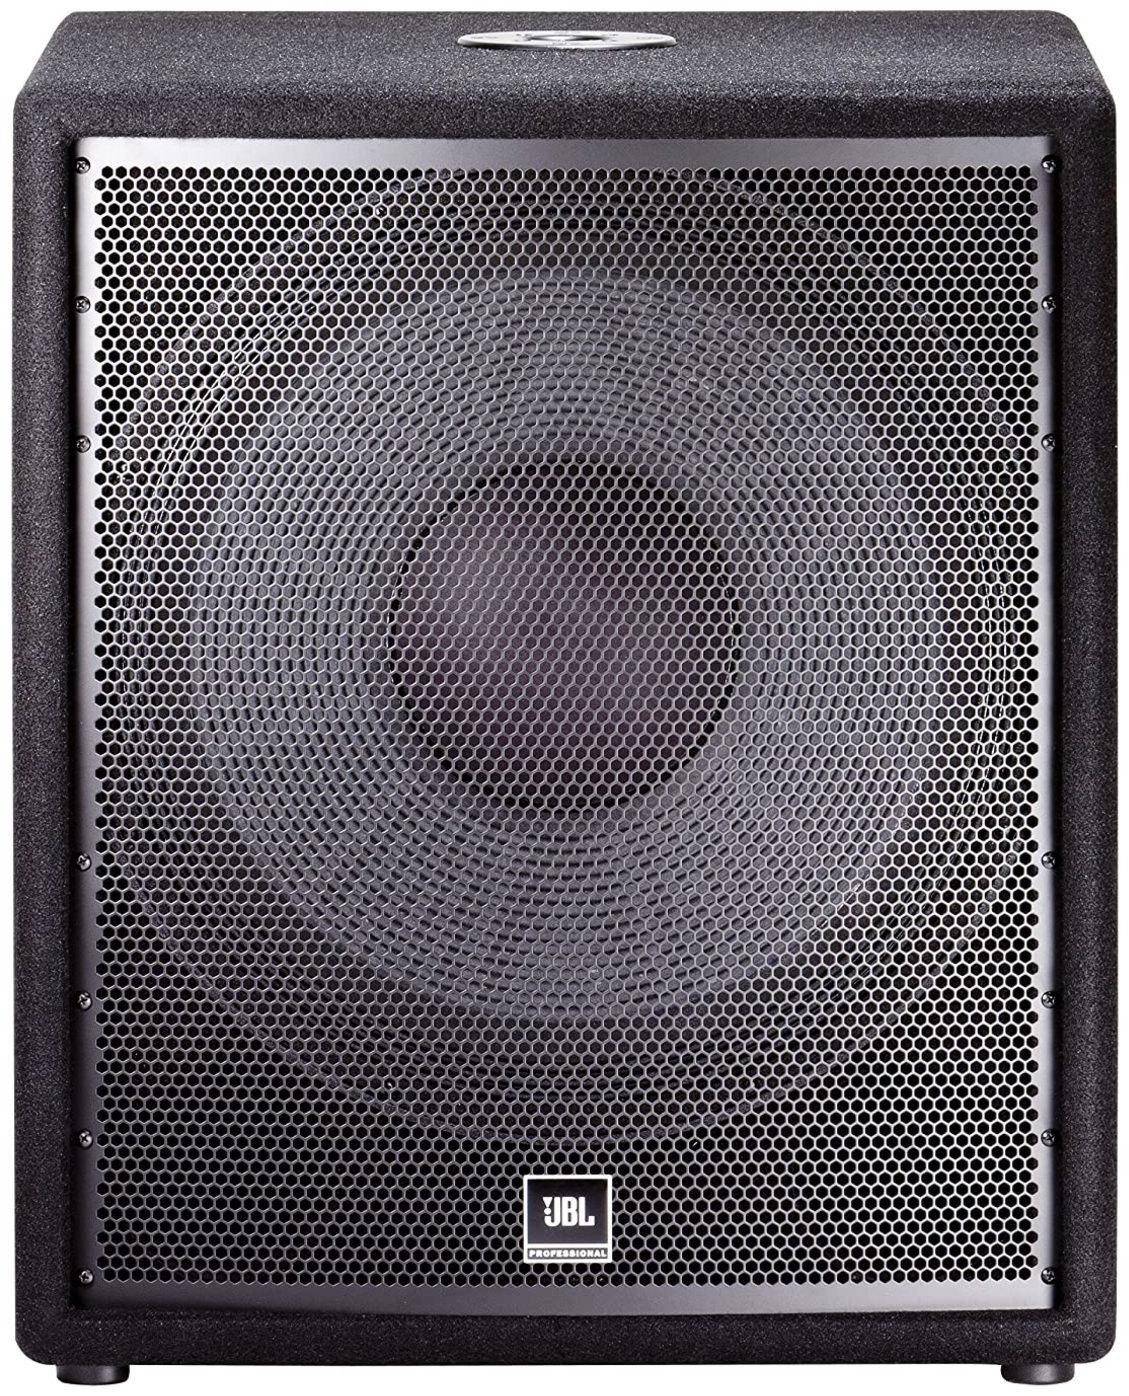 JBL JRX218S 18-inch Compact Subwoofer with  1400W Power Capacity zoom image